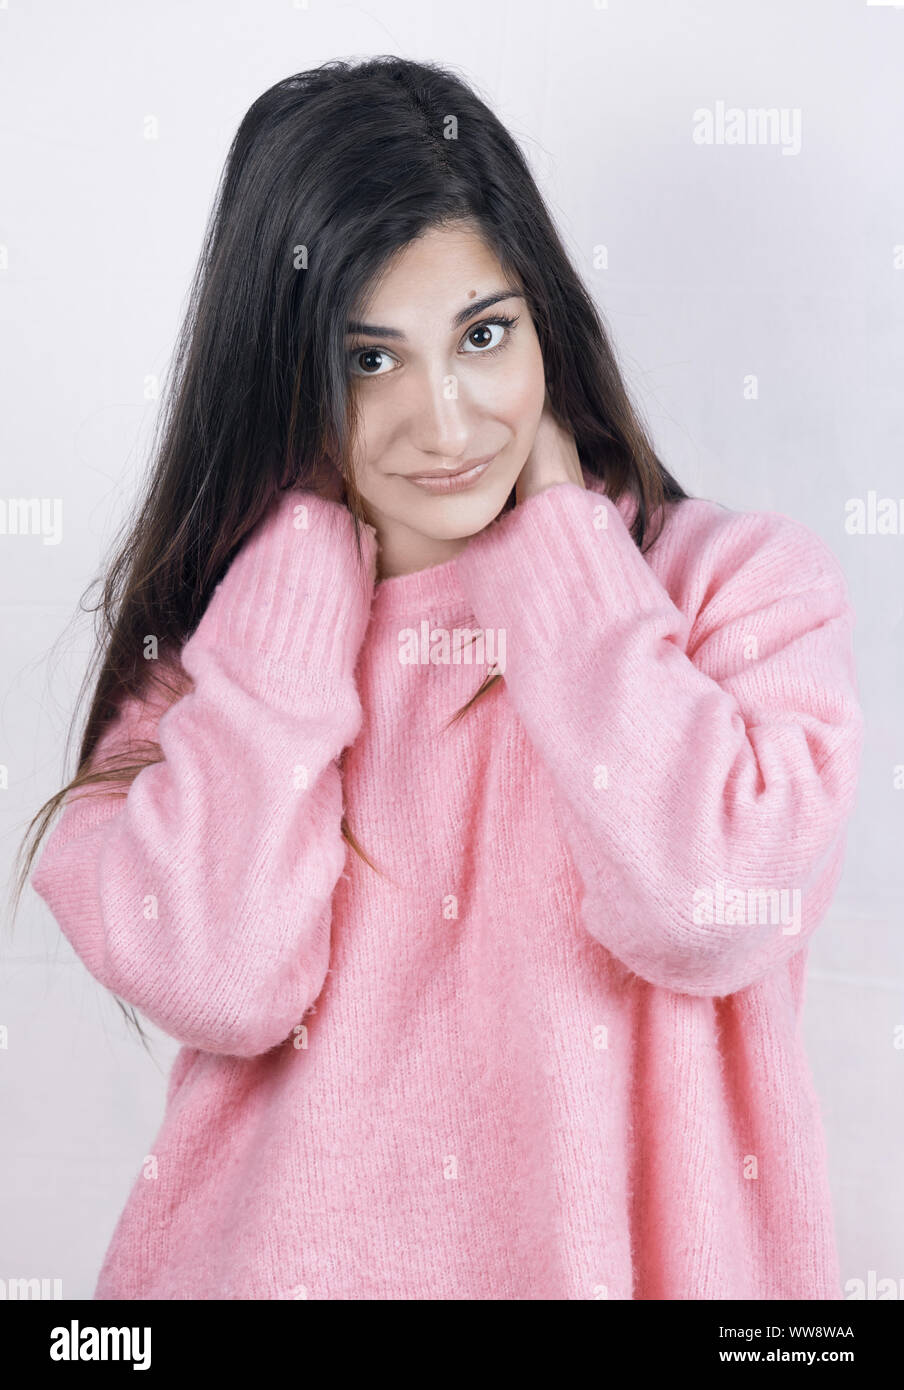 Pretty girl with straight hair and a warm pink sweater Stock Photo